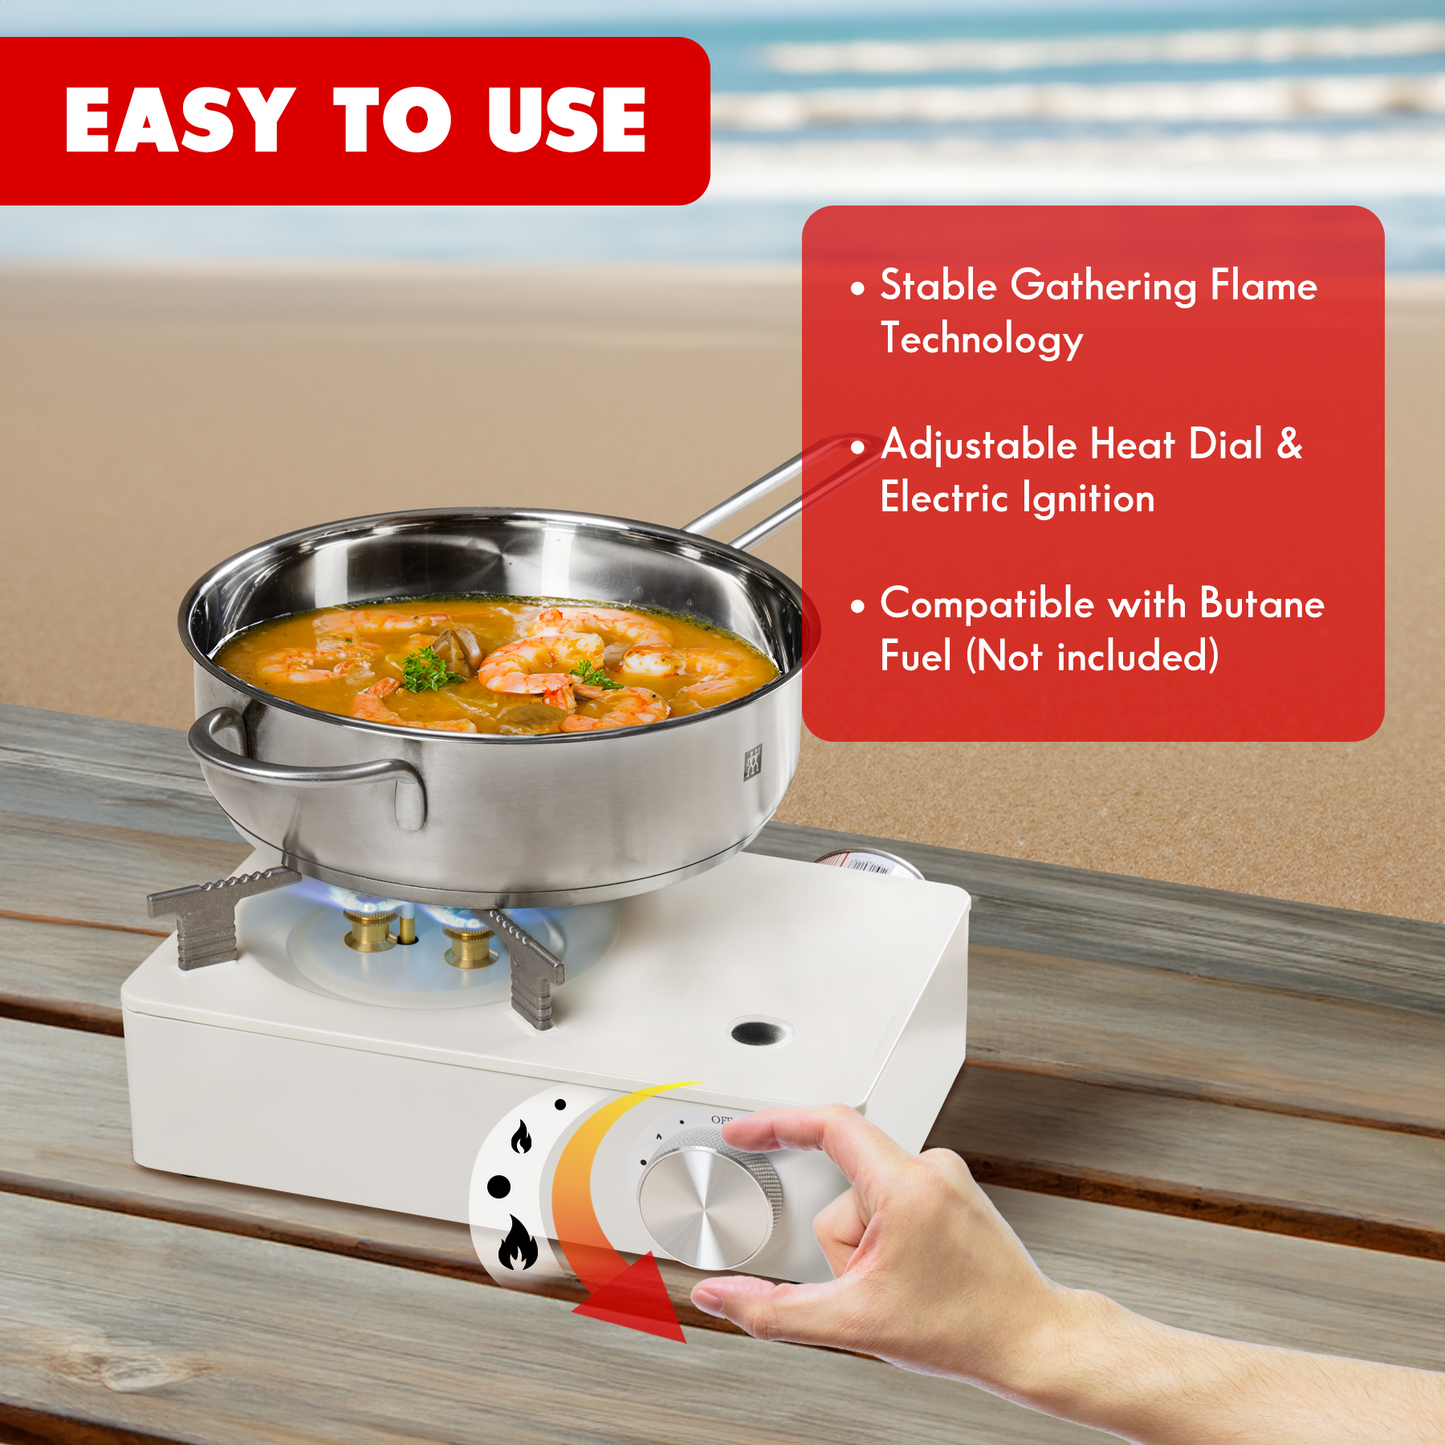 hand turning dial knob with a pot of curry shrimp on top of camping stove